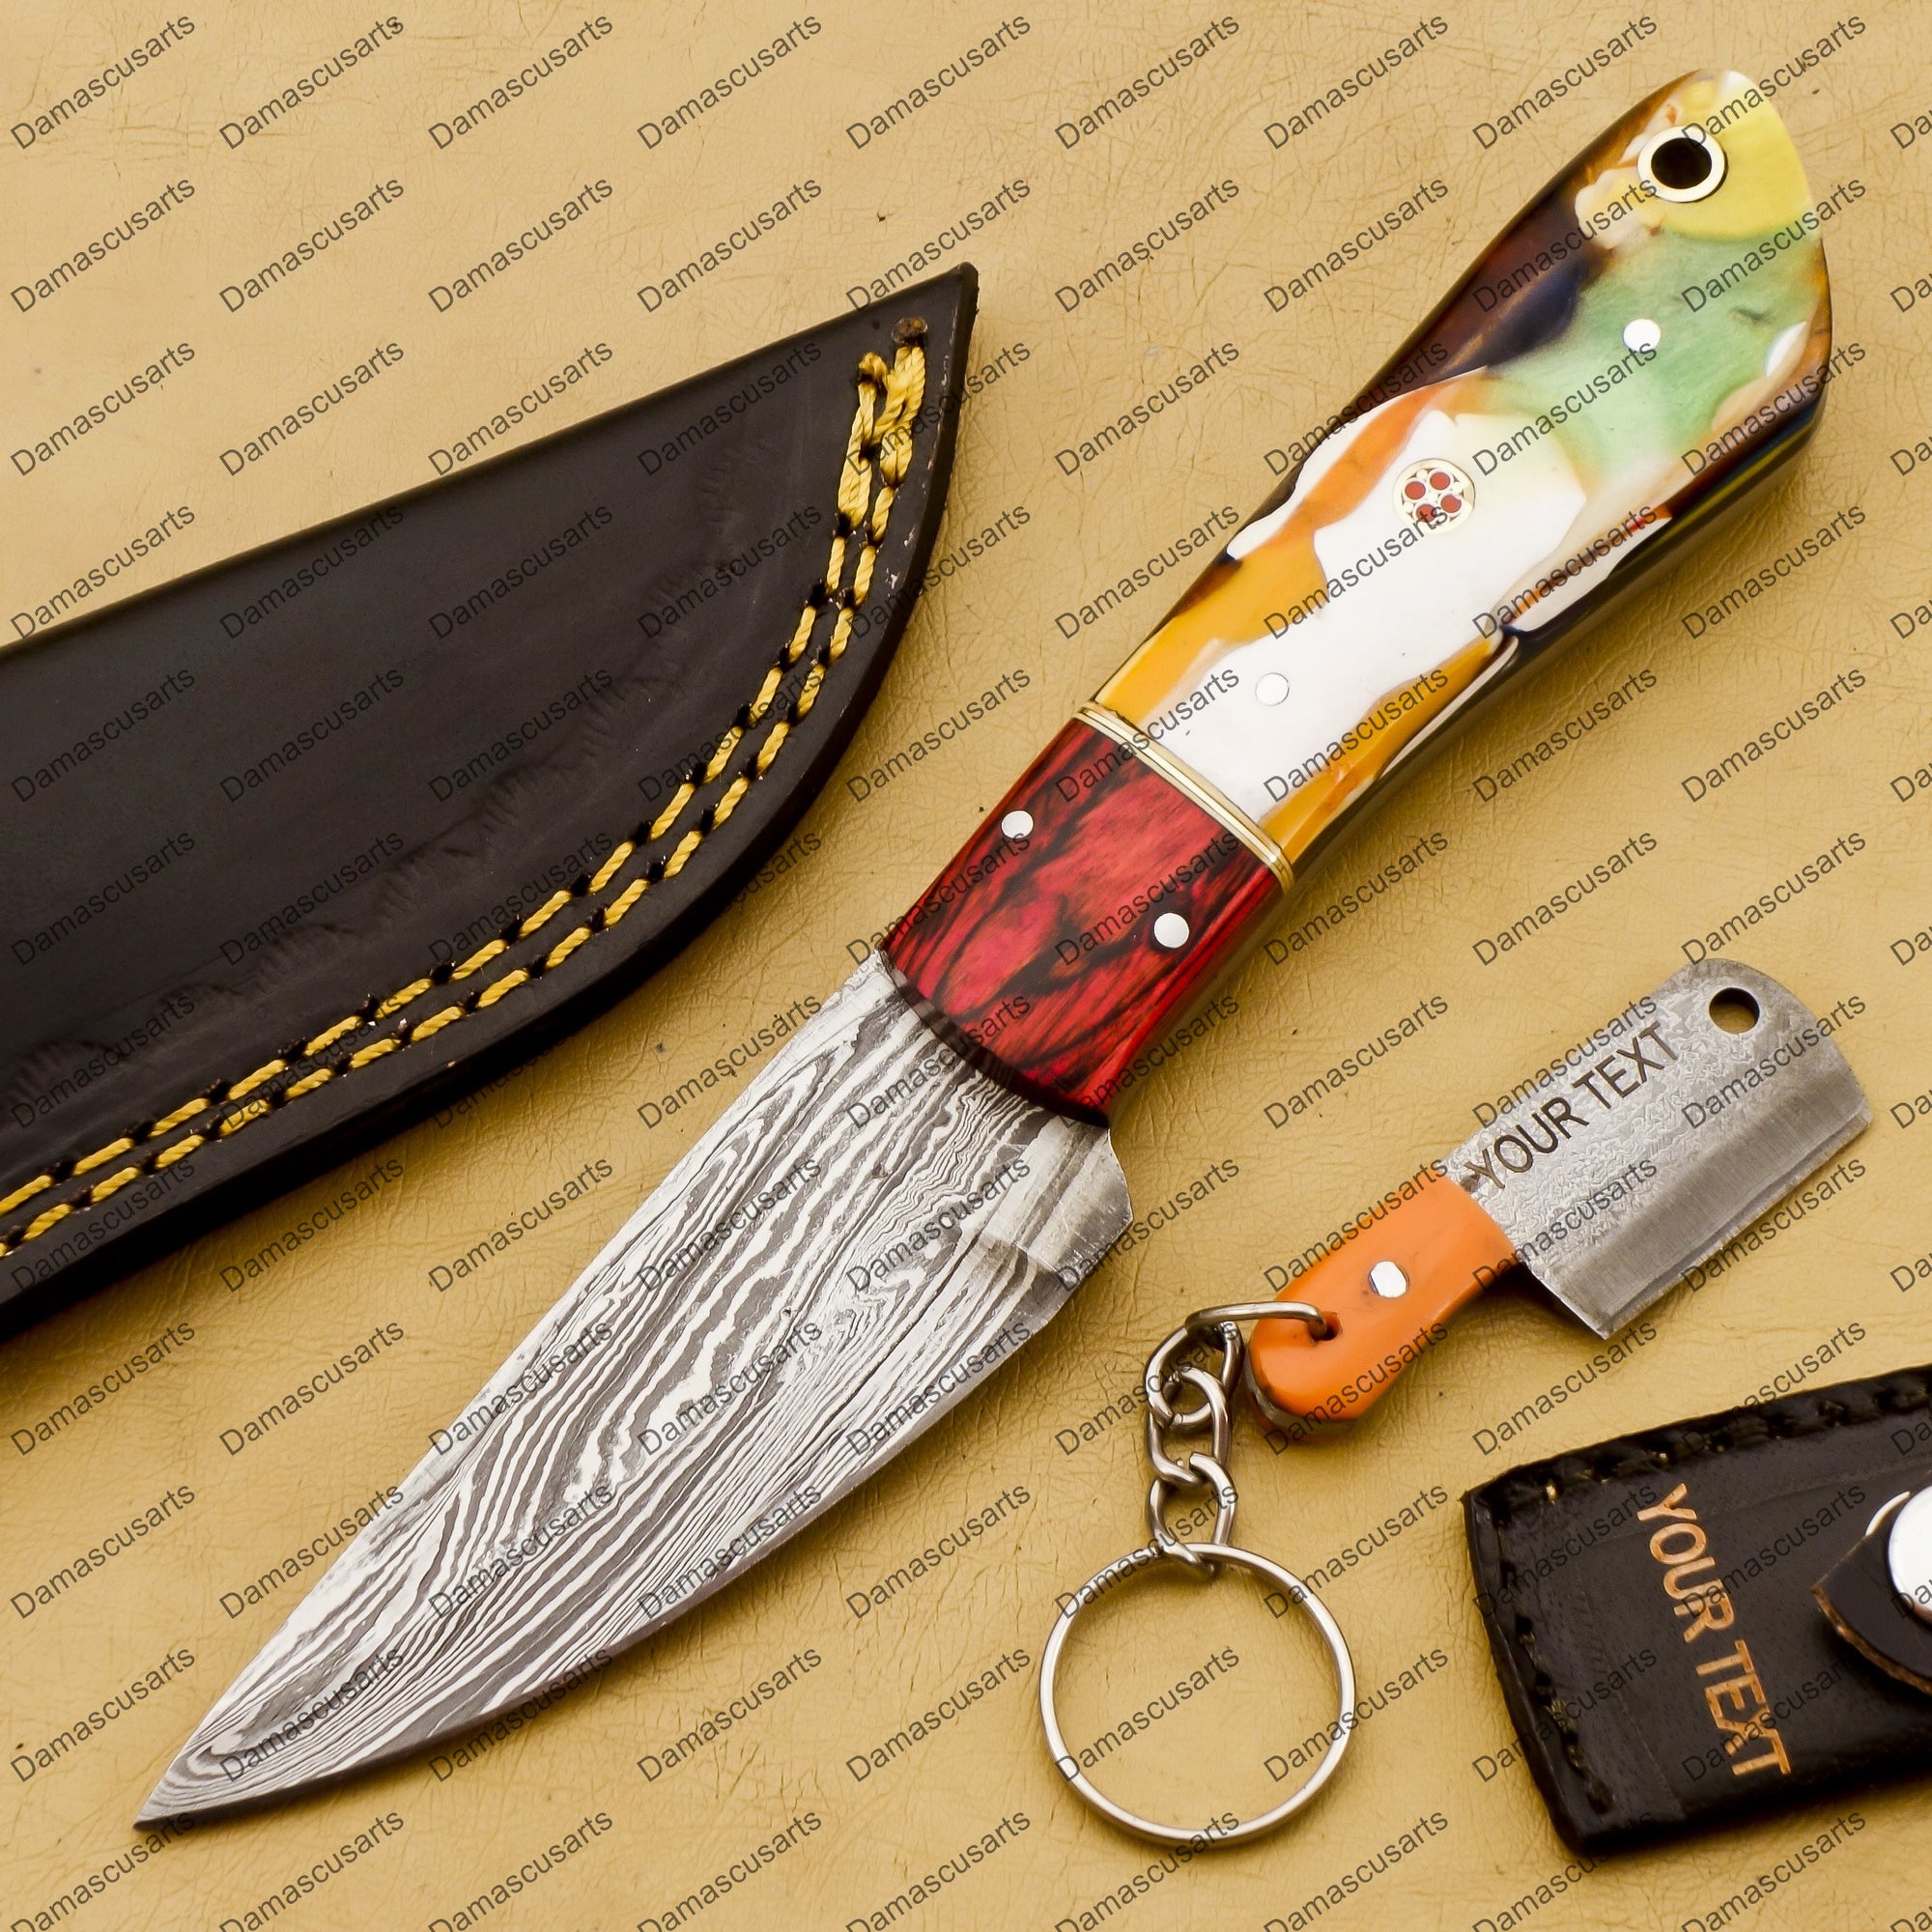 Customize Custom Hand Made Forged Hunter Knife Damascus Steel Bowie Knife Handle Dia Bone with Leather Sheath Free Key Chain Gift